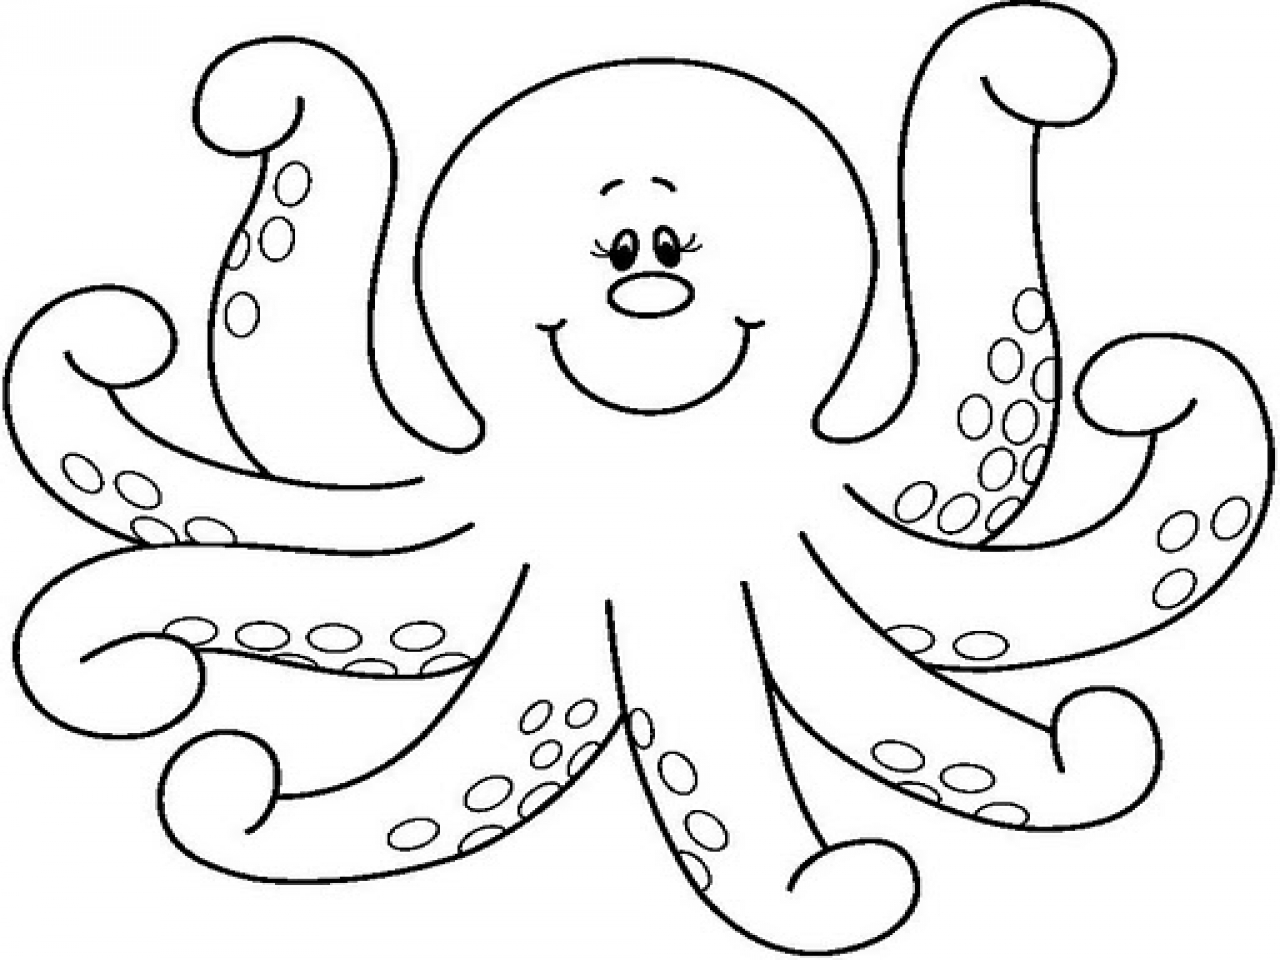 Free Octopus Clip Art Black And White, Download Free Octopus Clip Art